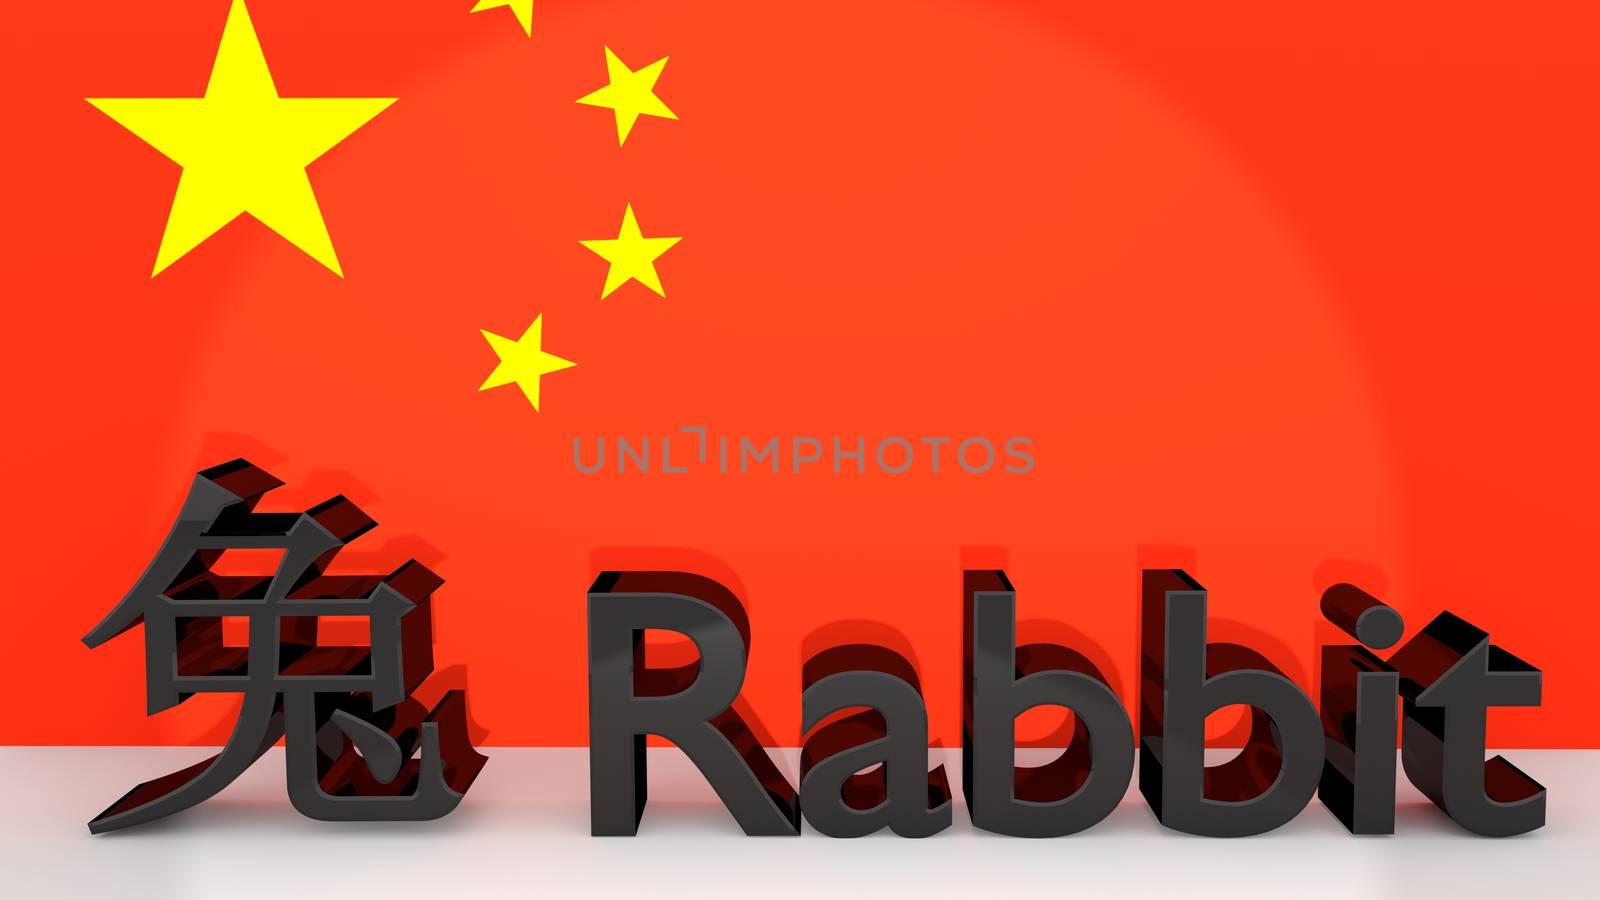 Chinese Zodiac Sign Rabbit with translation by MarkDw